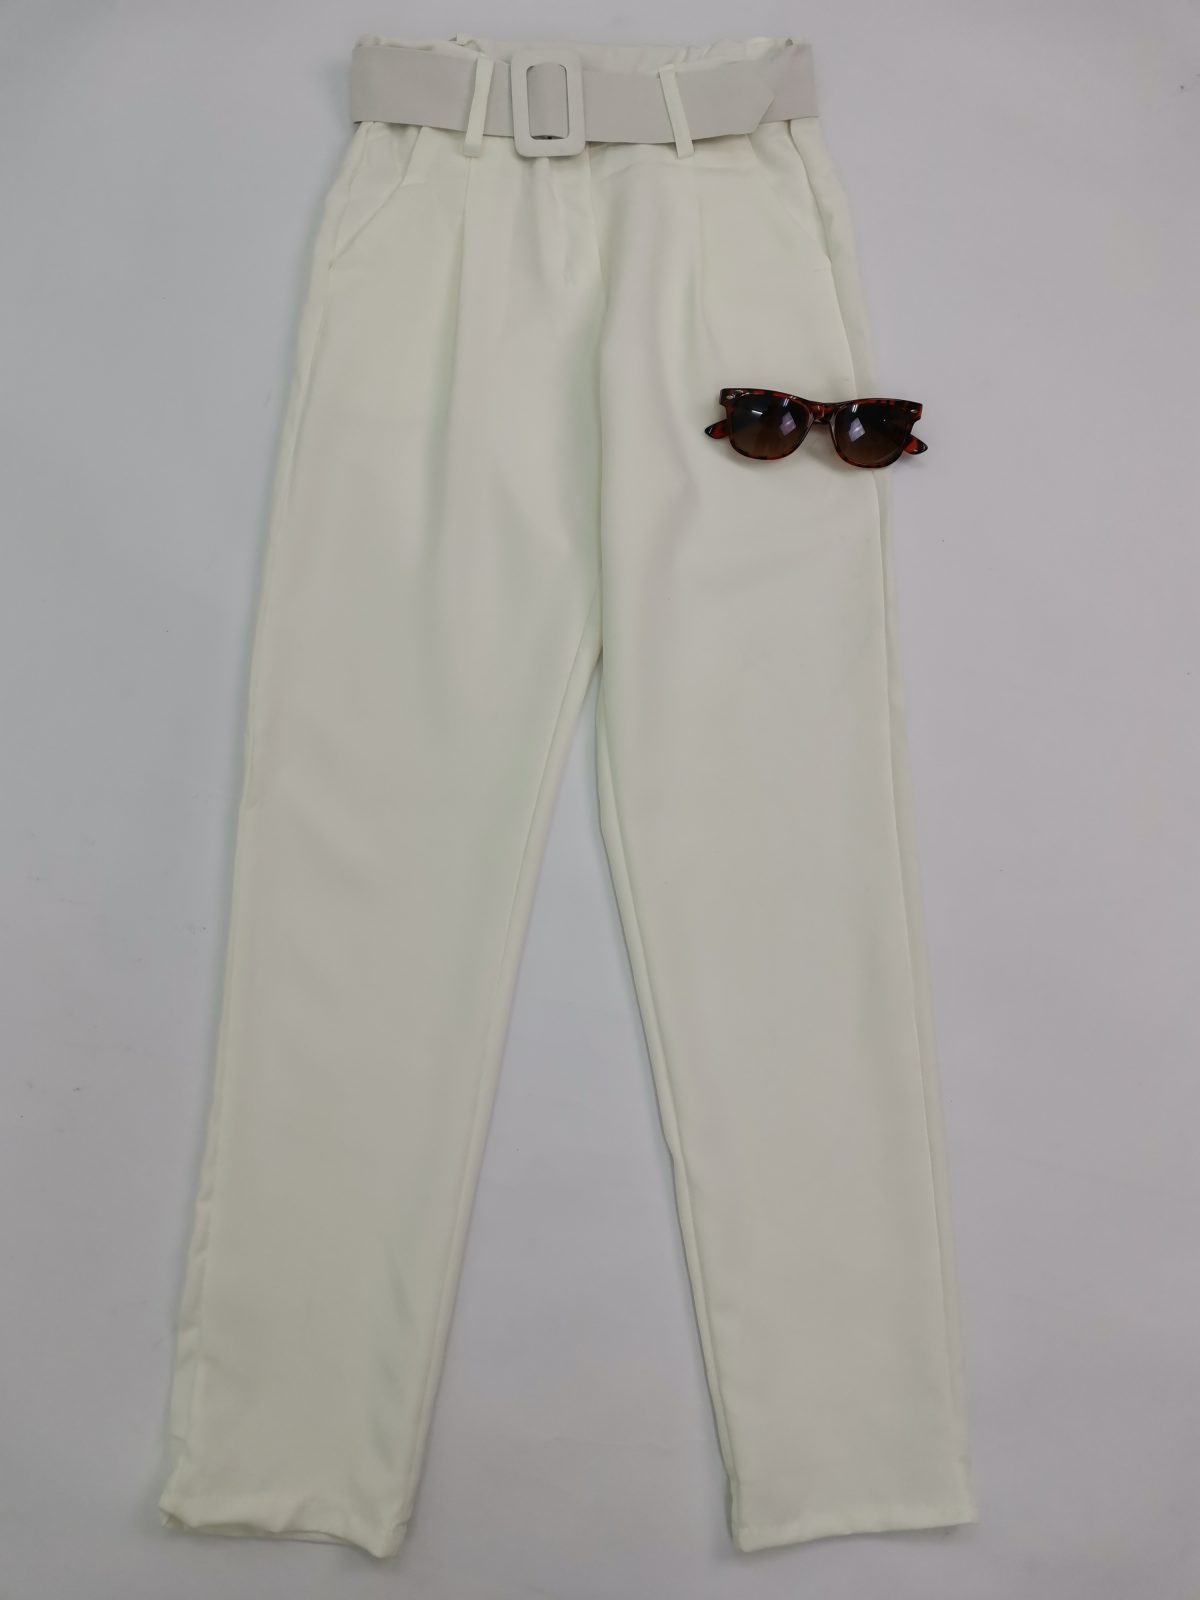 White high-waisted trousers with a white belt